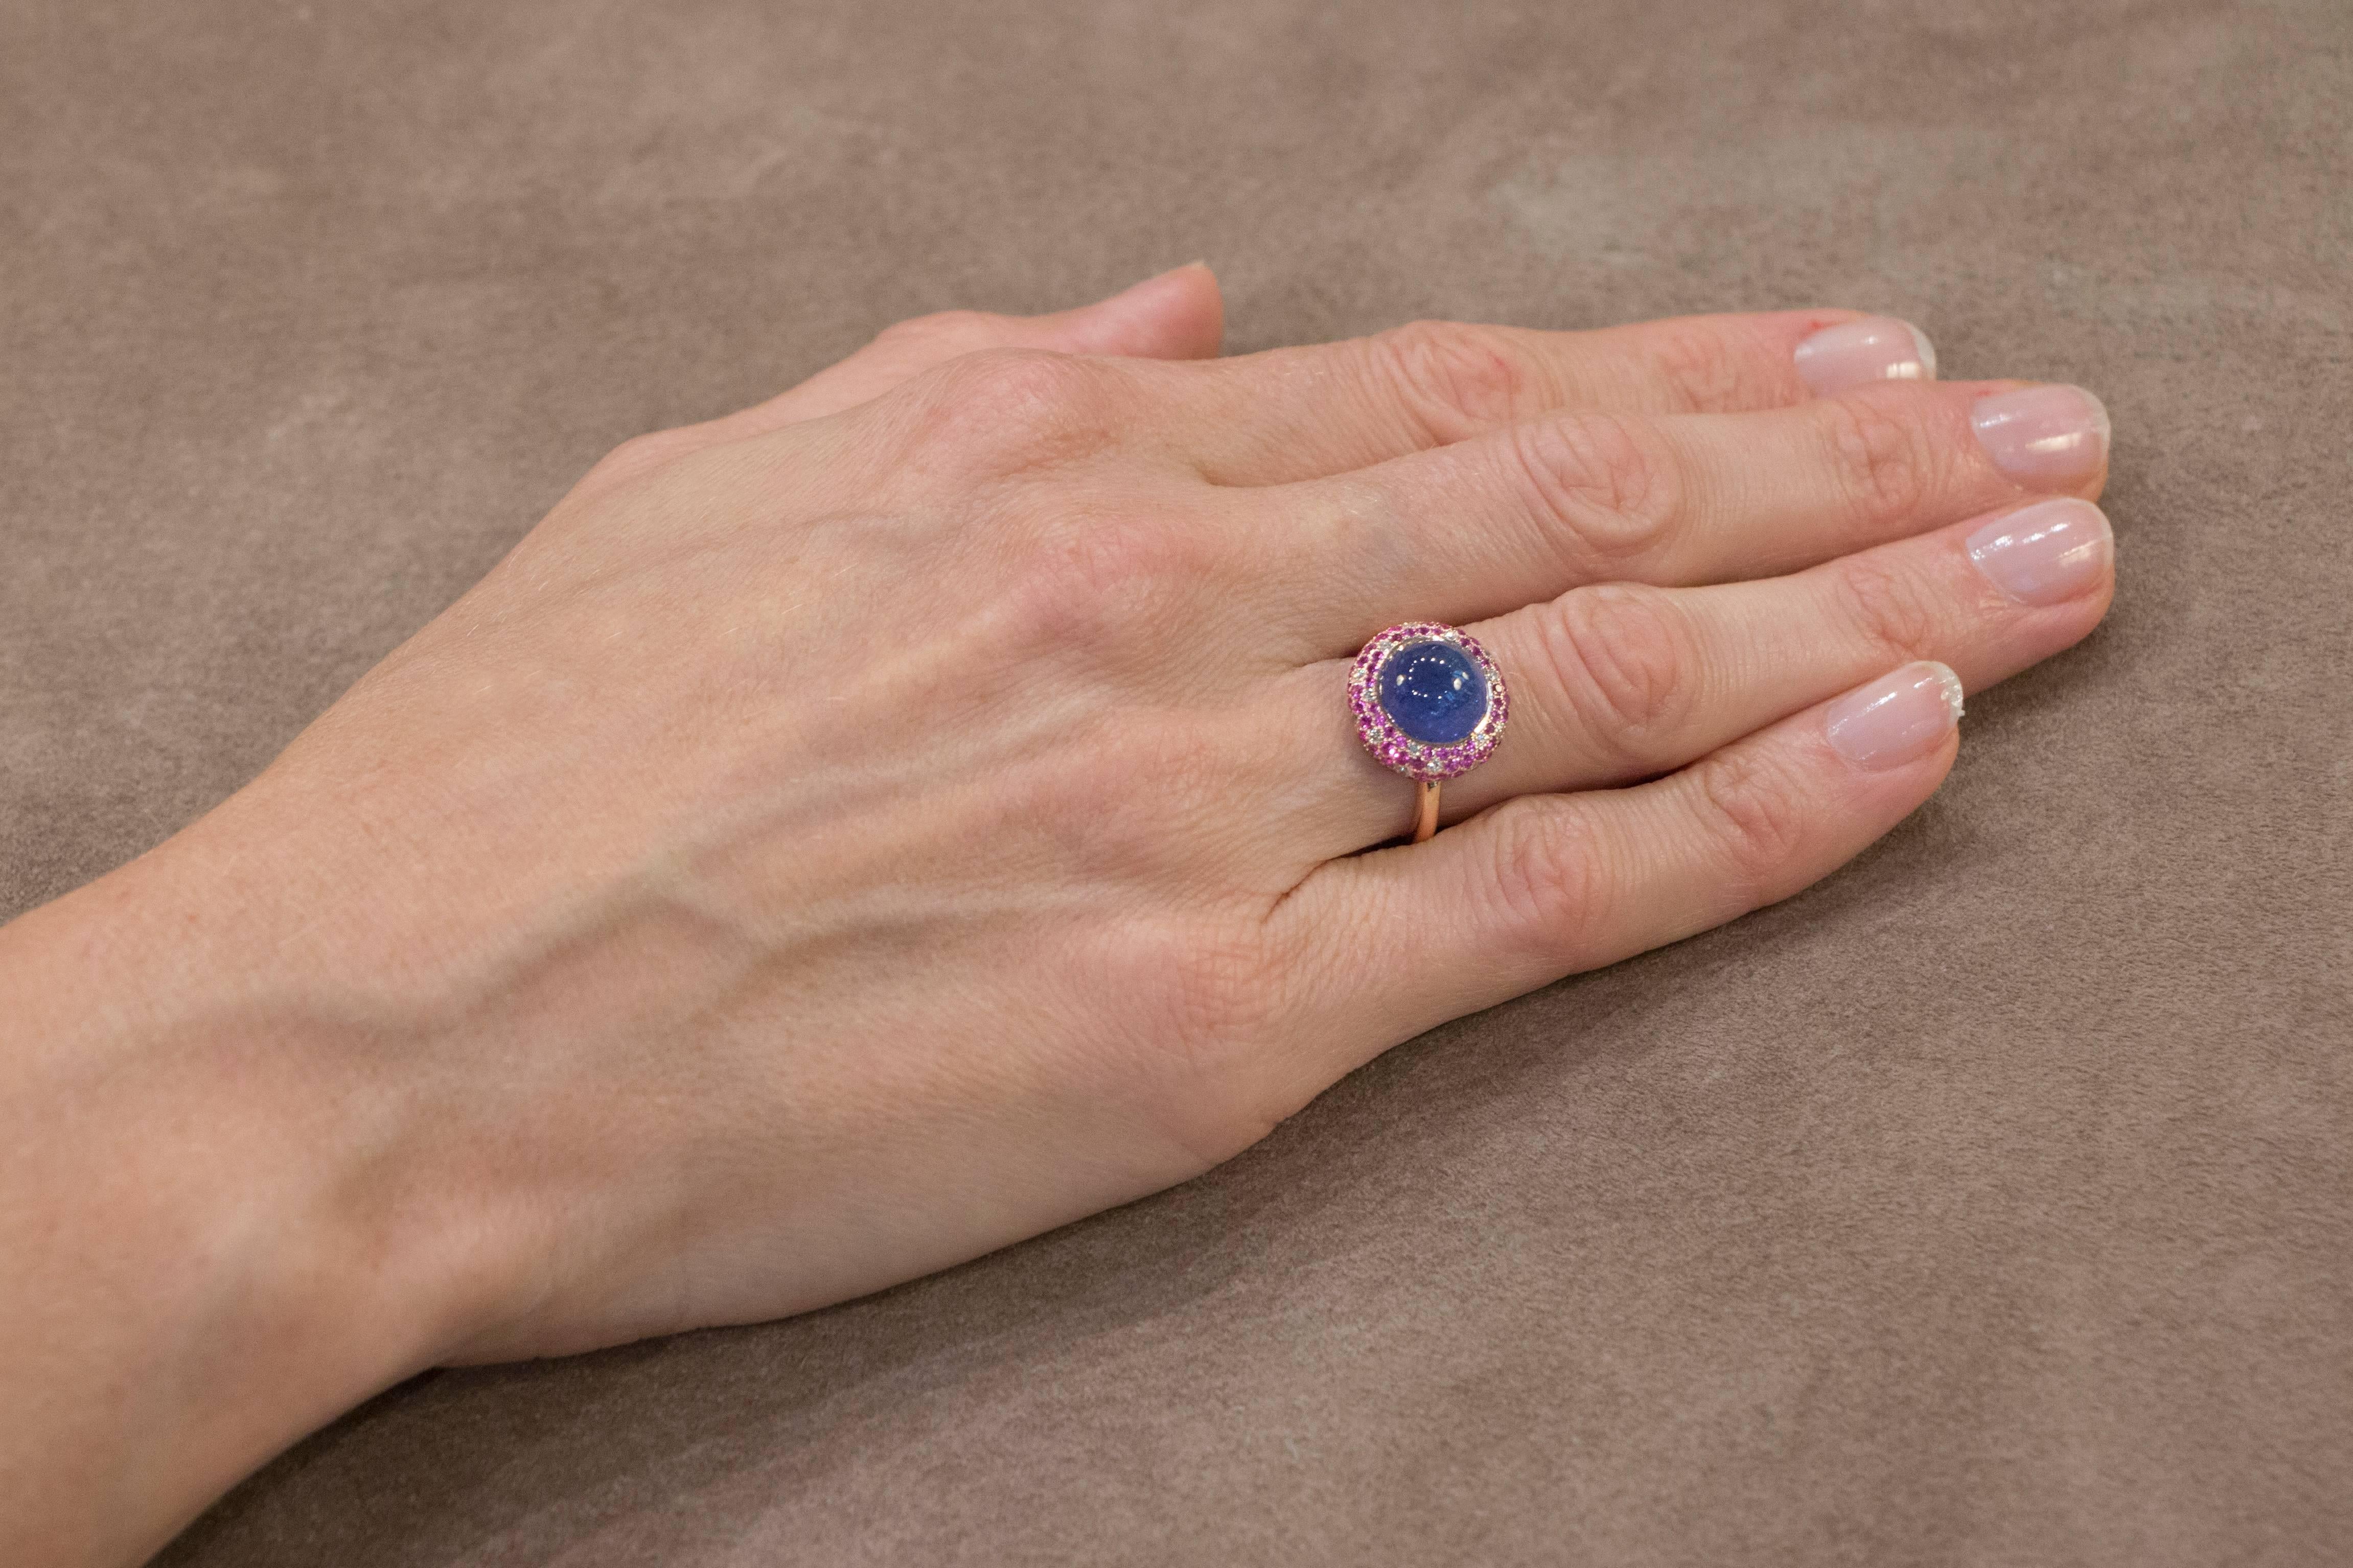 Jona design collection, hand crafted in Italy, 18 karat rose gold ring, centering a cabochon cut Tanzanite weighing 4.95 carats, surrounded by 80 pink sapphires weighing 0.91 carats and 20 white diamonds weighing 0.18 carats. Signed Jona.  US size: